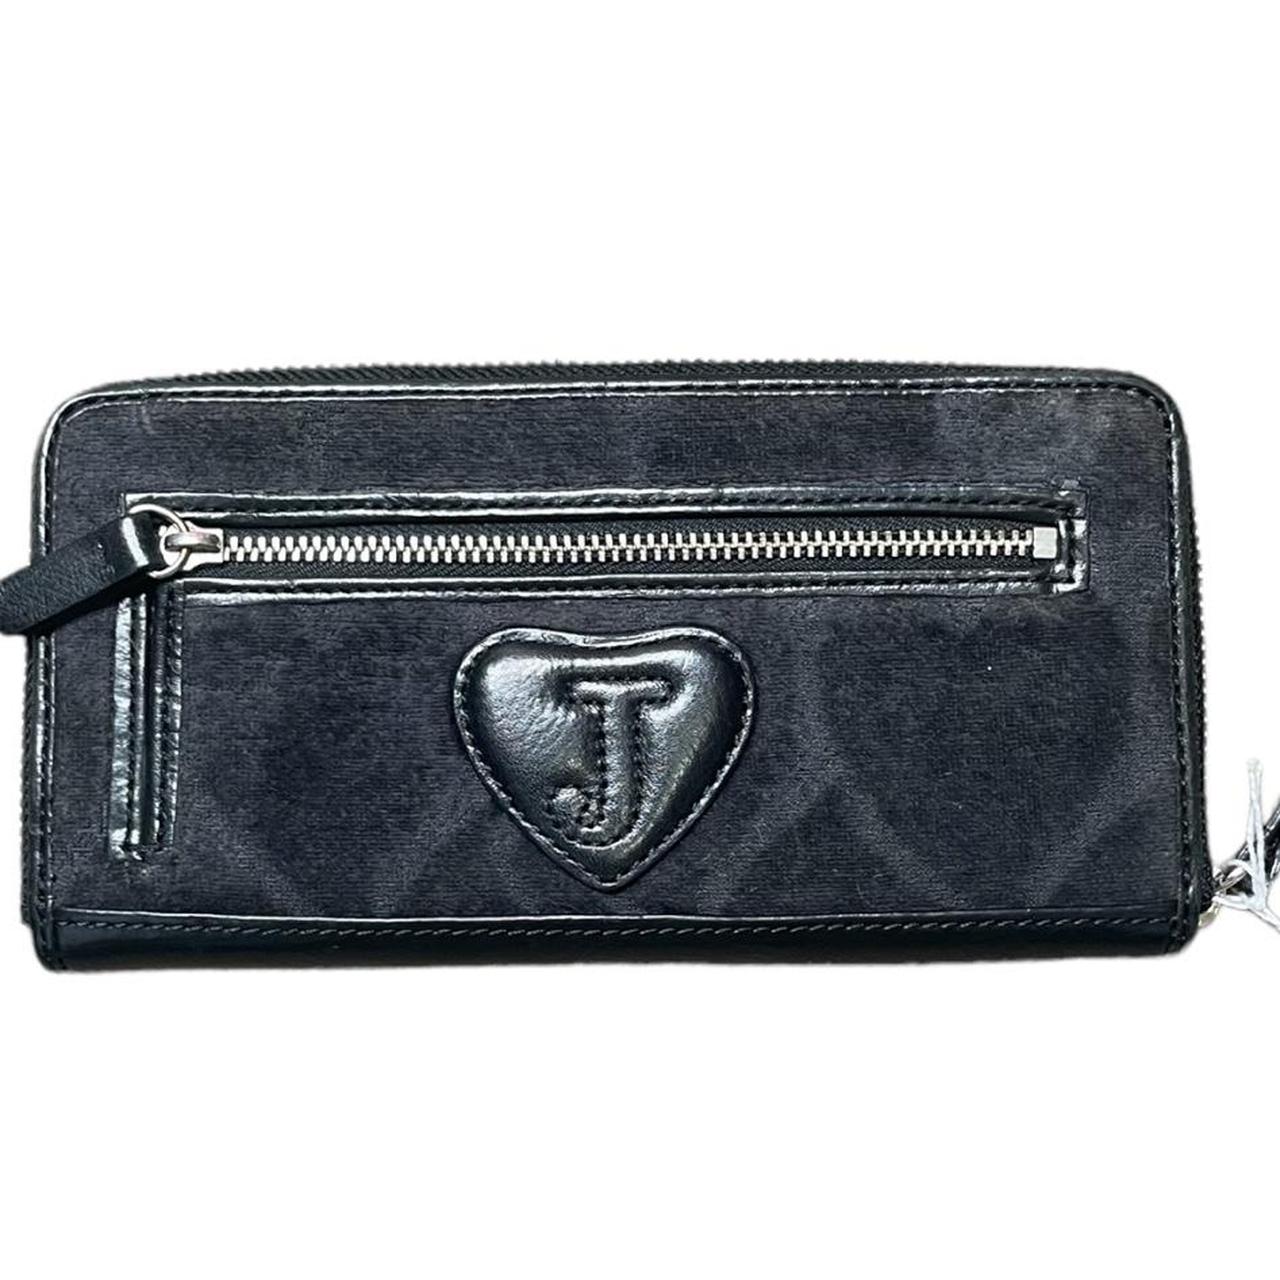 Juicy Couture Black Leather Crossbody Bag - $24 - From Frumi